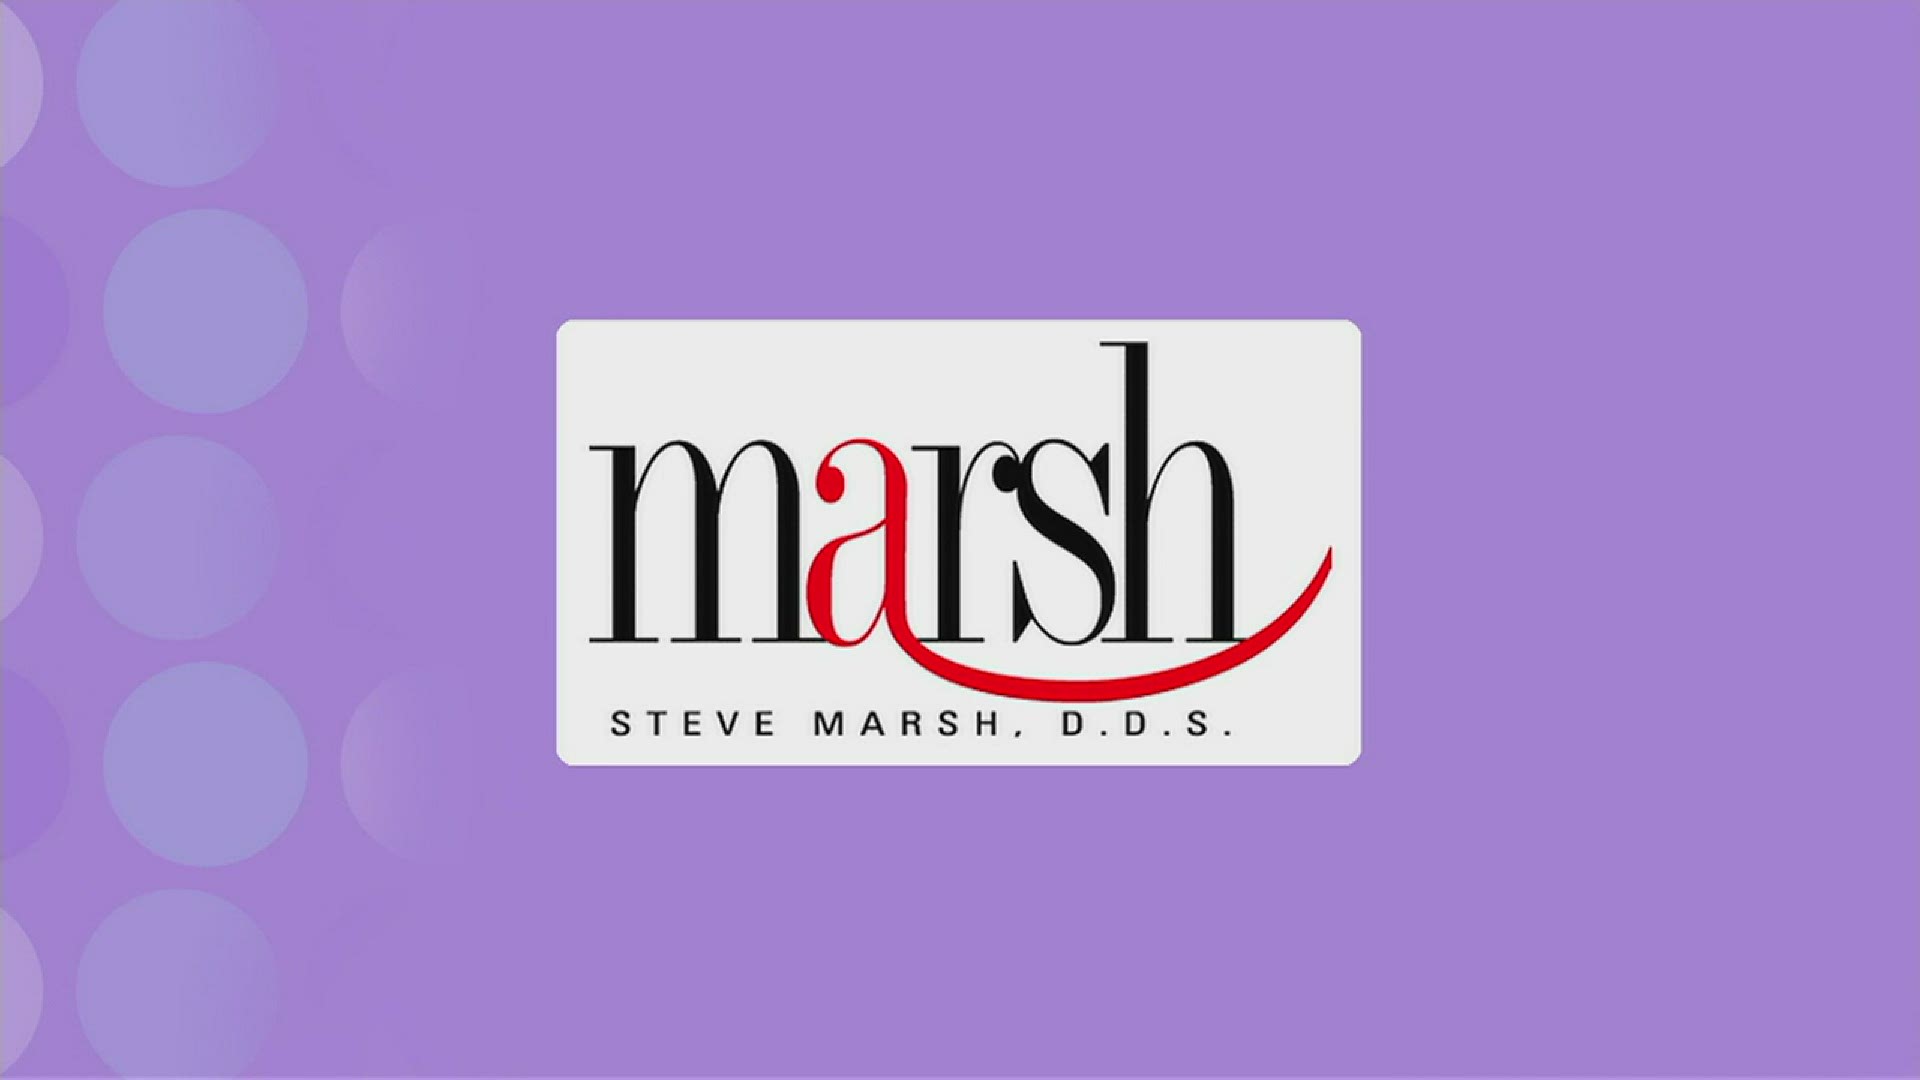 Joe talks with Steve Marsh about his practice. Helping people feel comfortable with their teeth and a team-center atmosphere that they take very seriously.